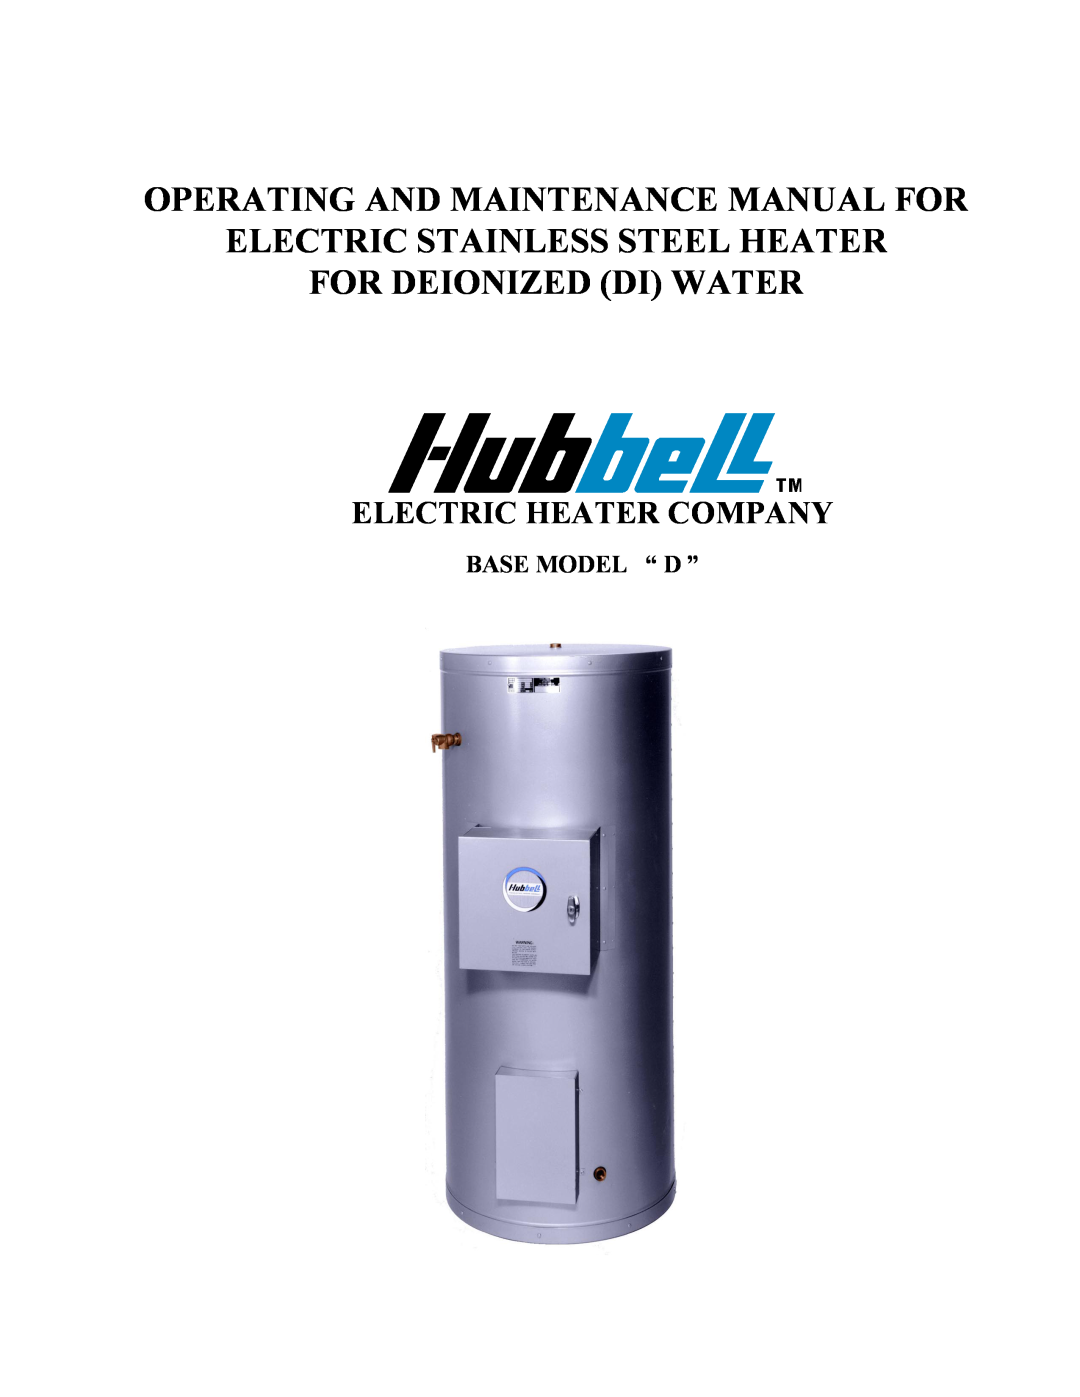 Hubbell Electric Heater Company manual Base Model “ D ”, Operating And Maintenance Manual For, For Deionized Di Water 